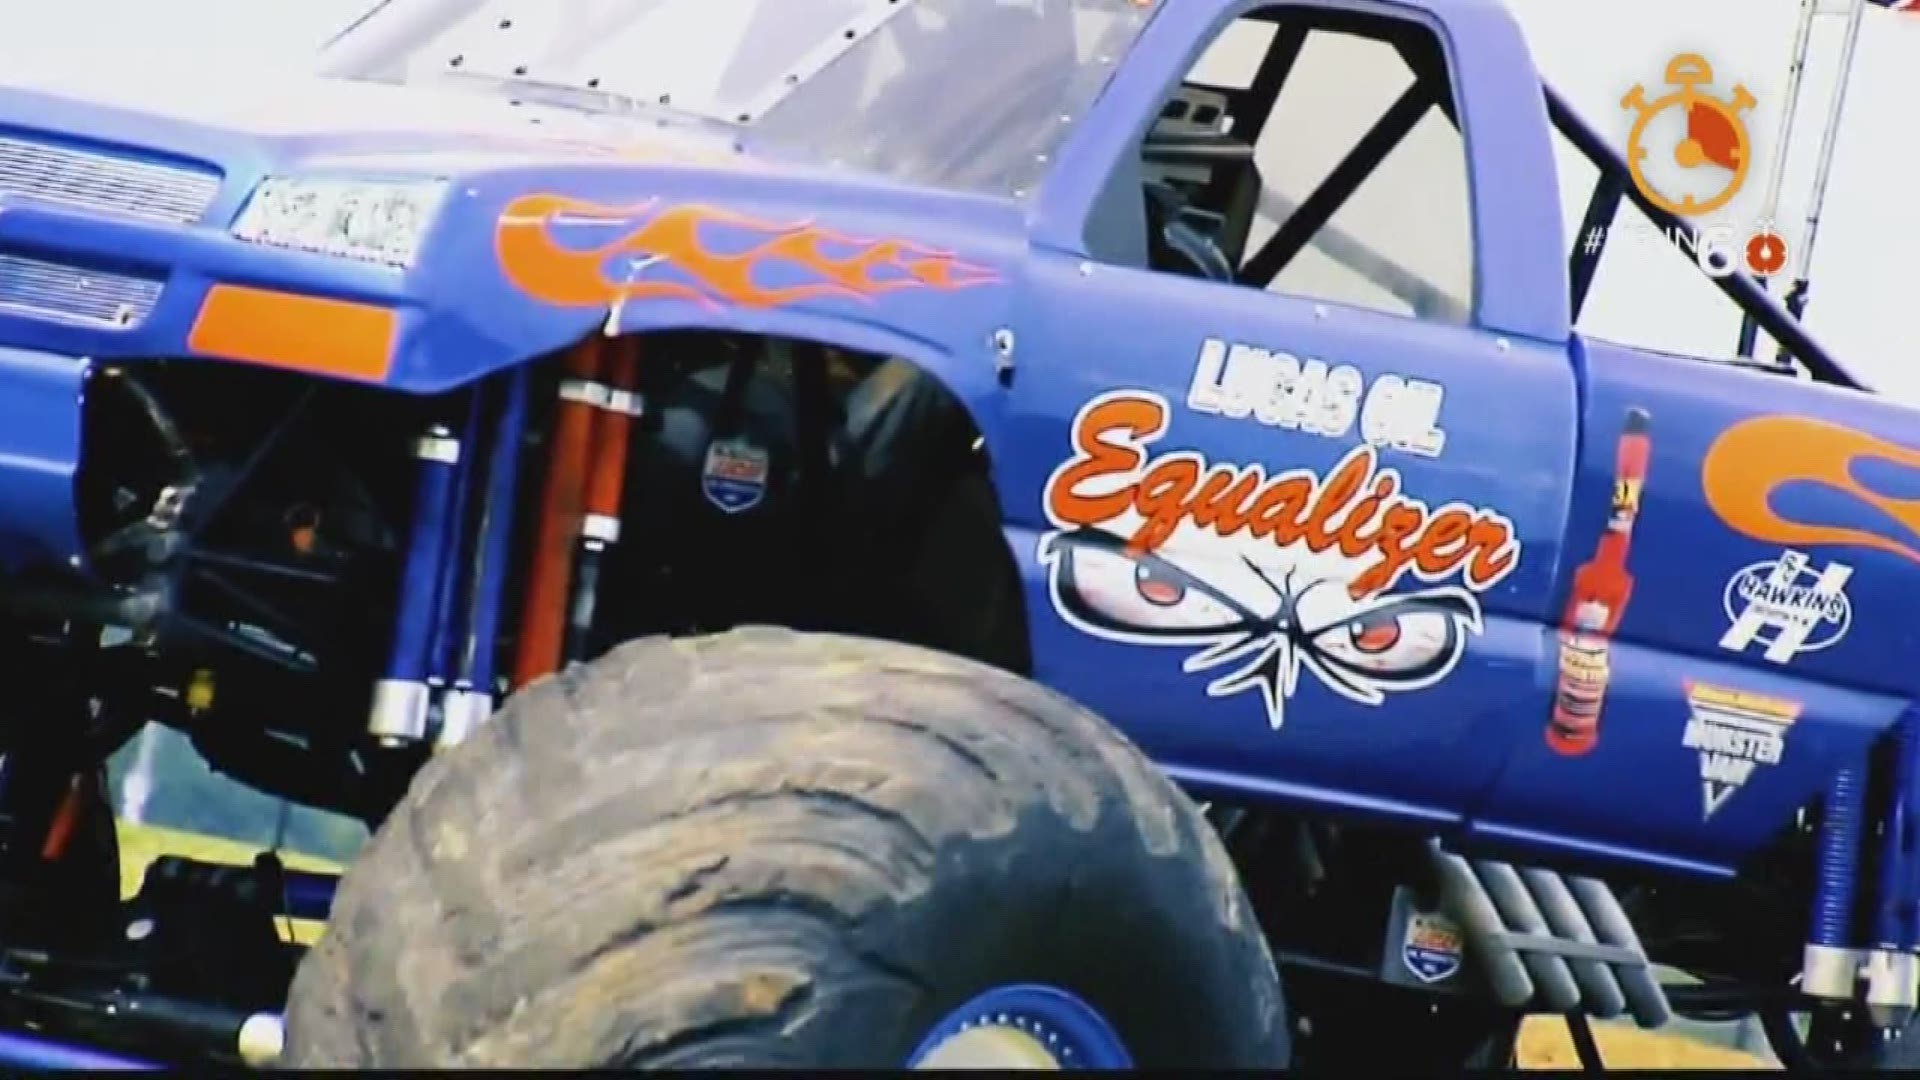 Charlotte Motor Speedway is kicking off the new school year with a huge monster truck bash. Wake Up Charlotte's Hannah Welker got a behind-the-scenes tour and even jumped behind the wheel!